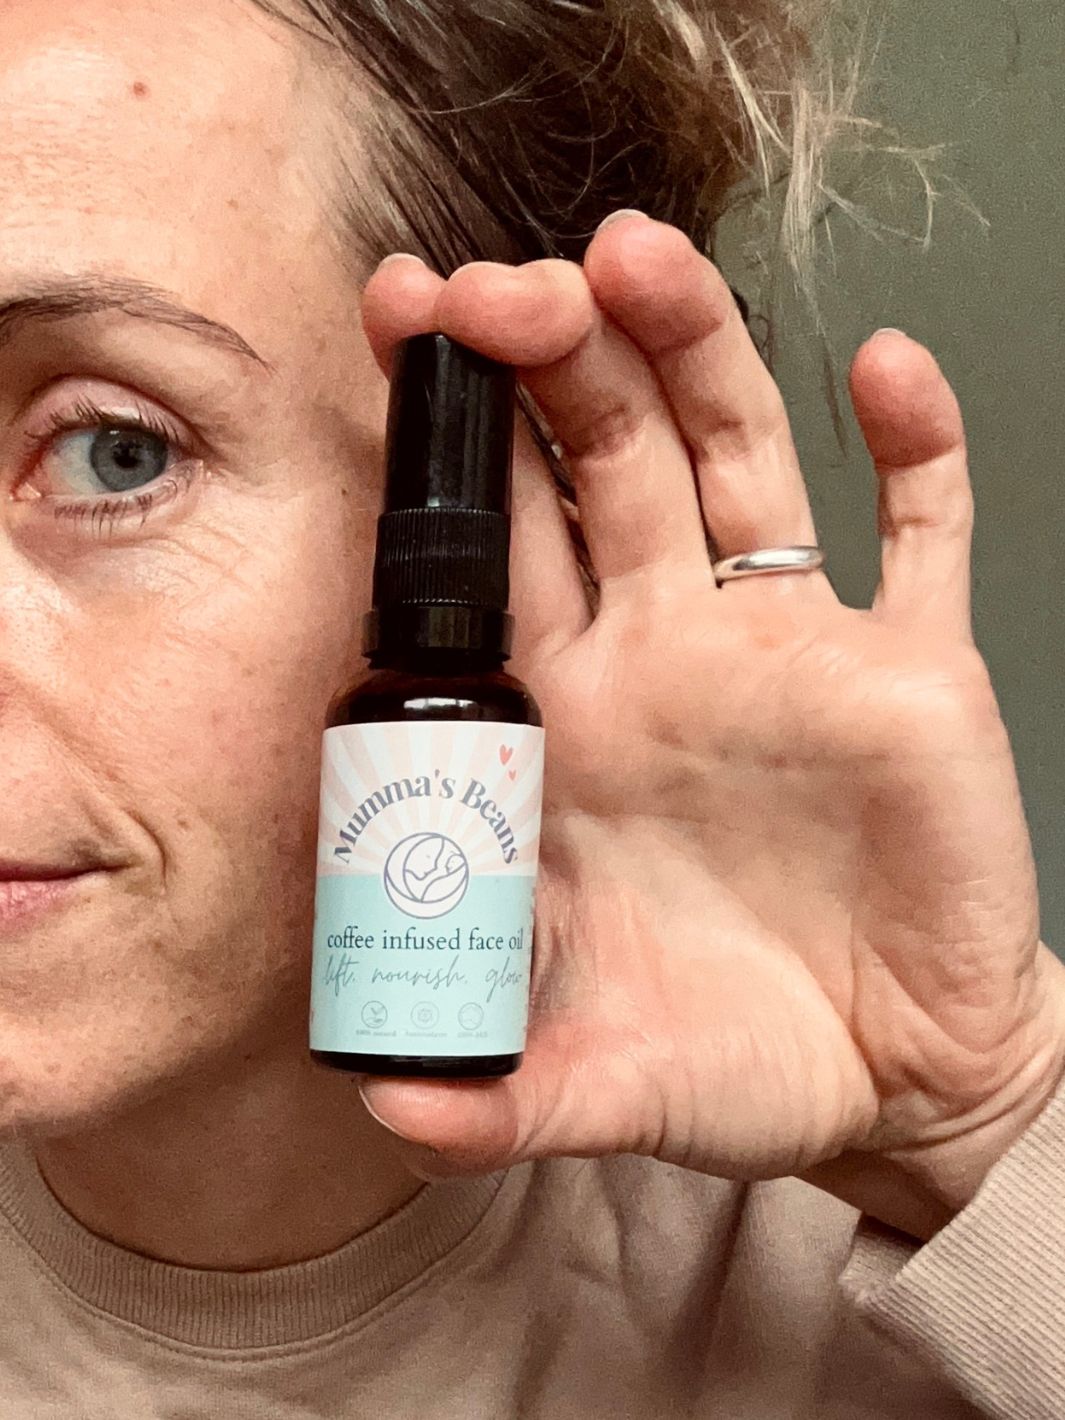 hydrating face oil for healthy looking skin